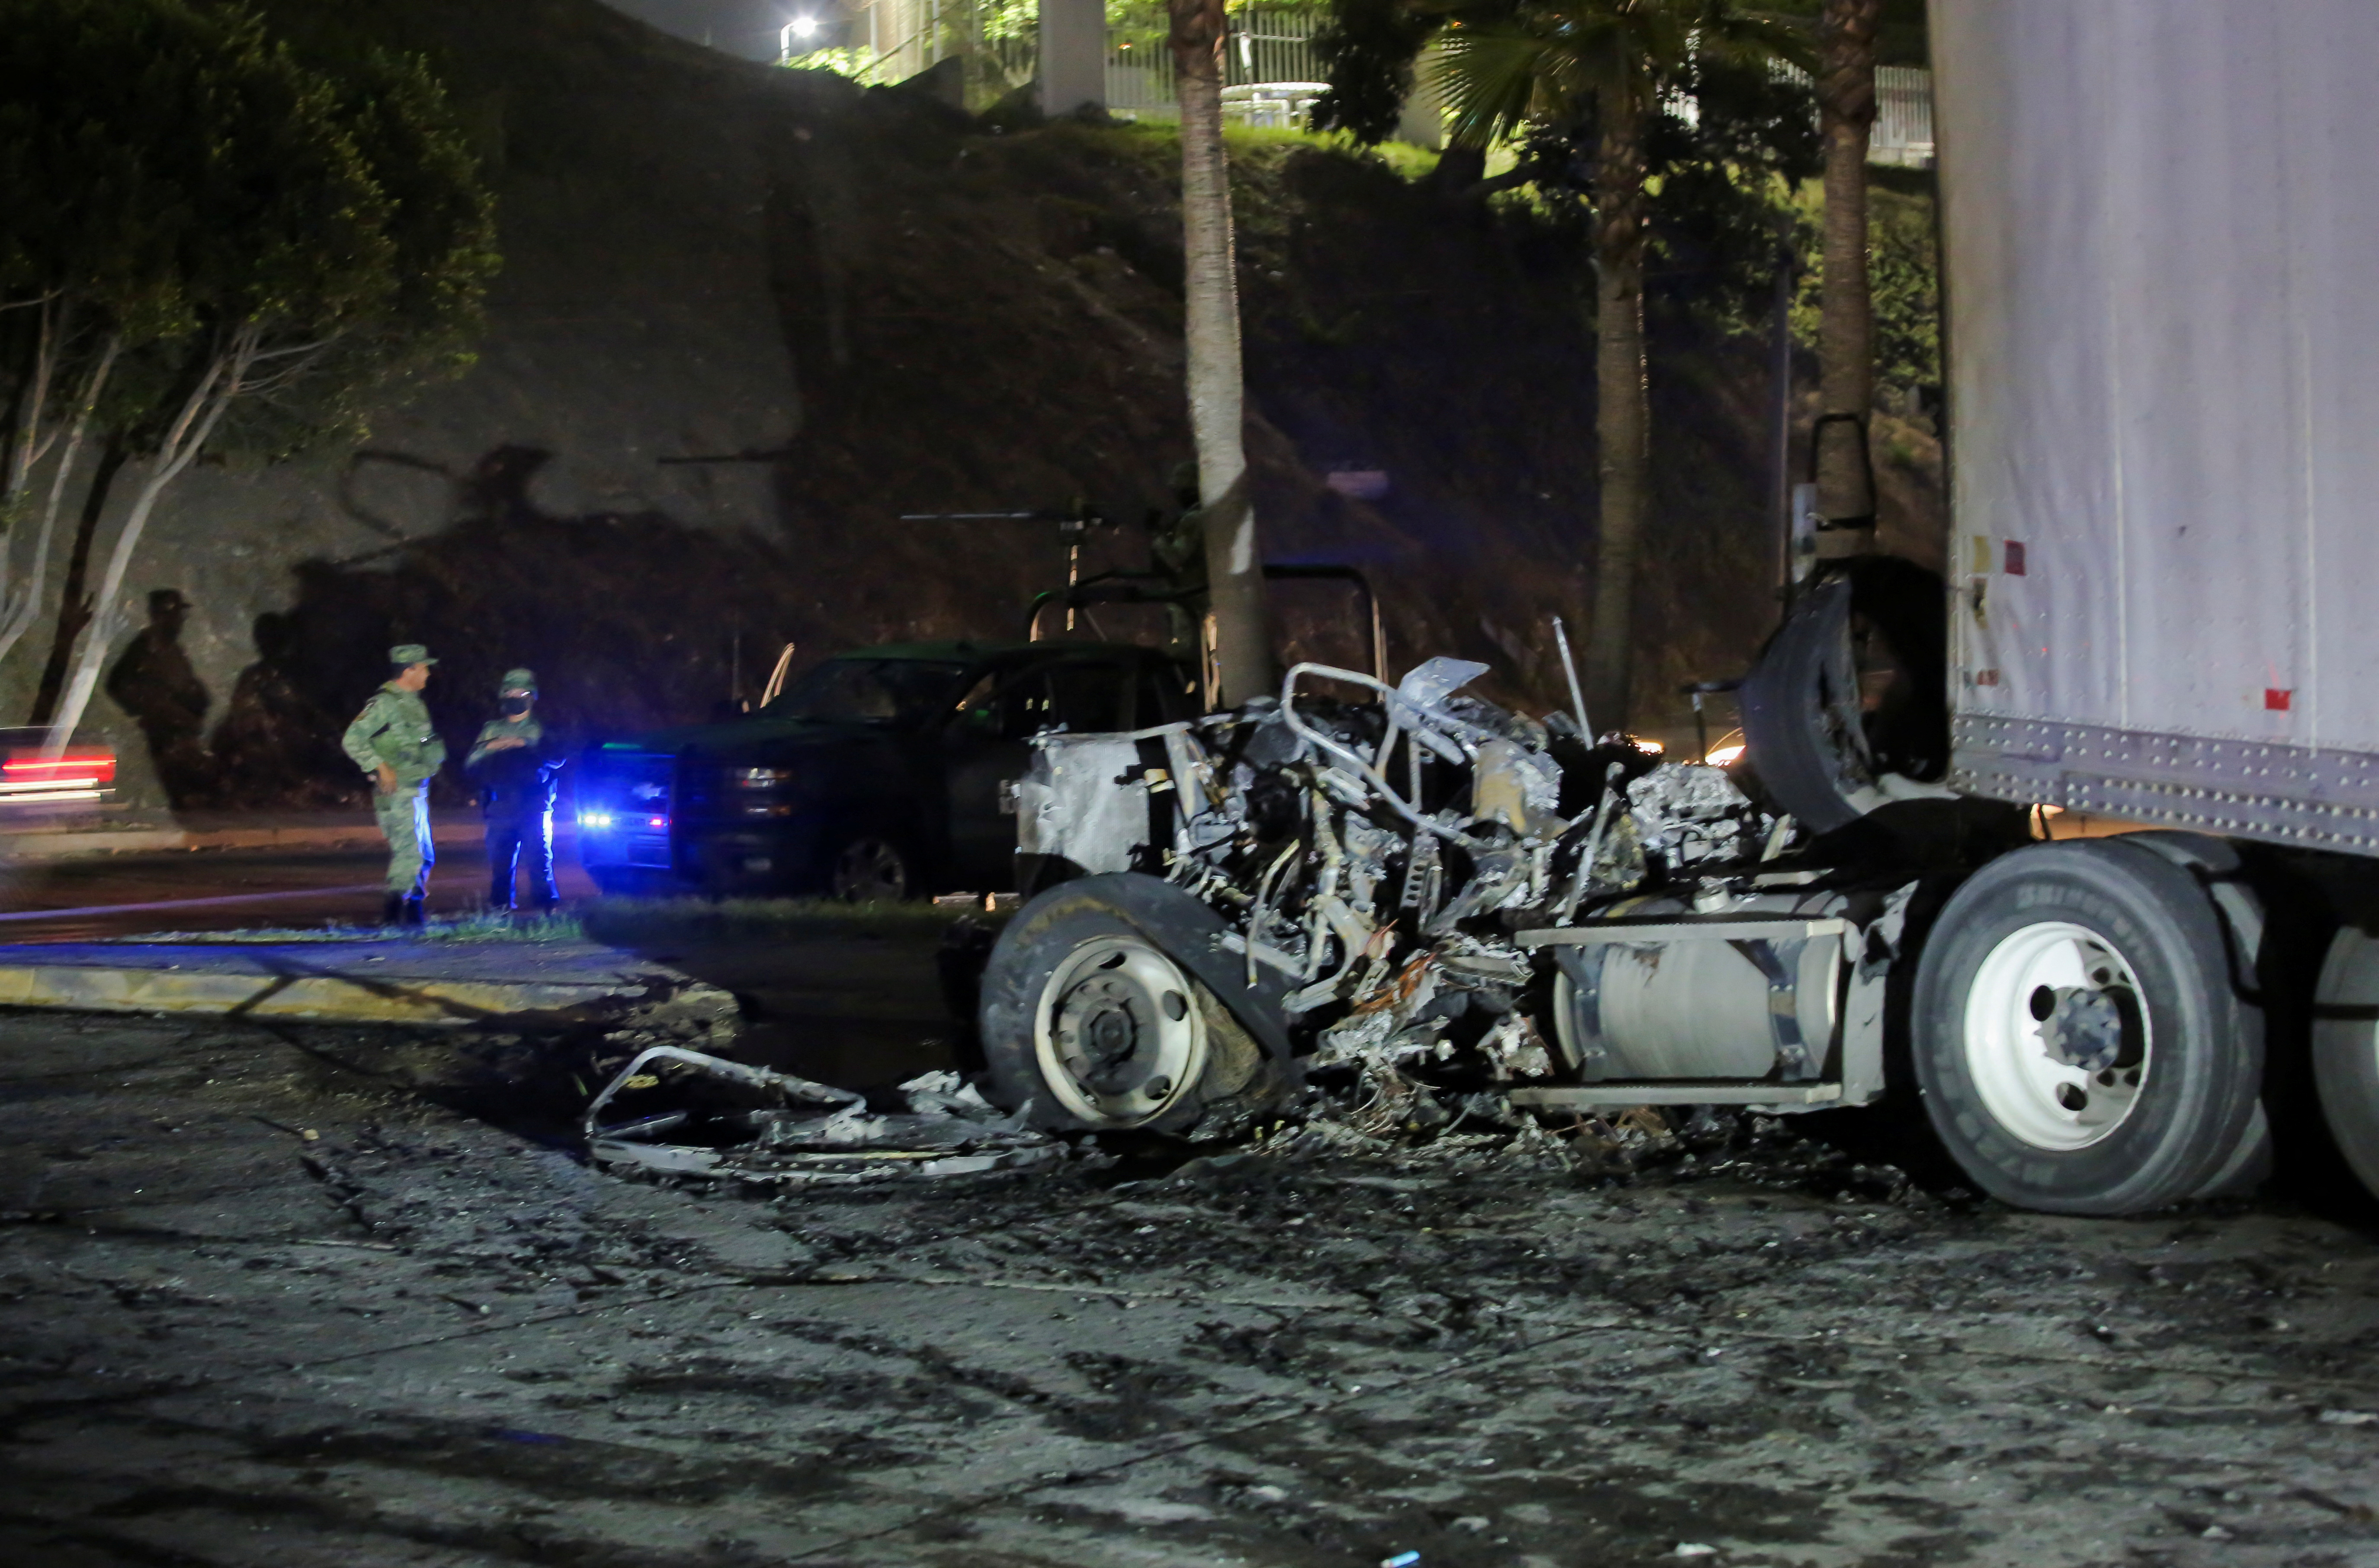 A view shows burnt vehicles after they were set on fire by unidentified individuals in Tijuana